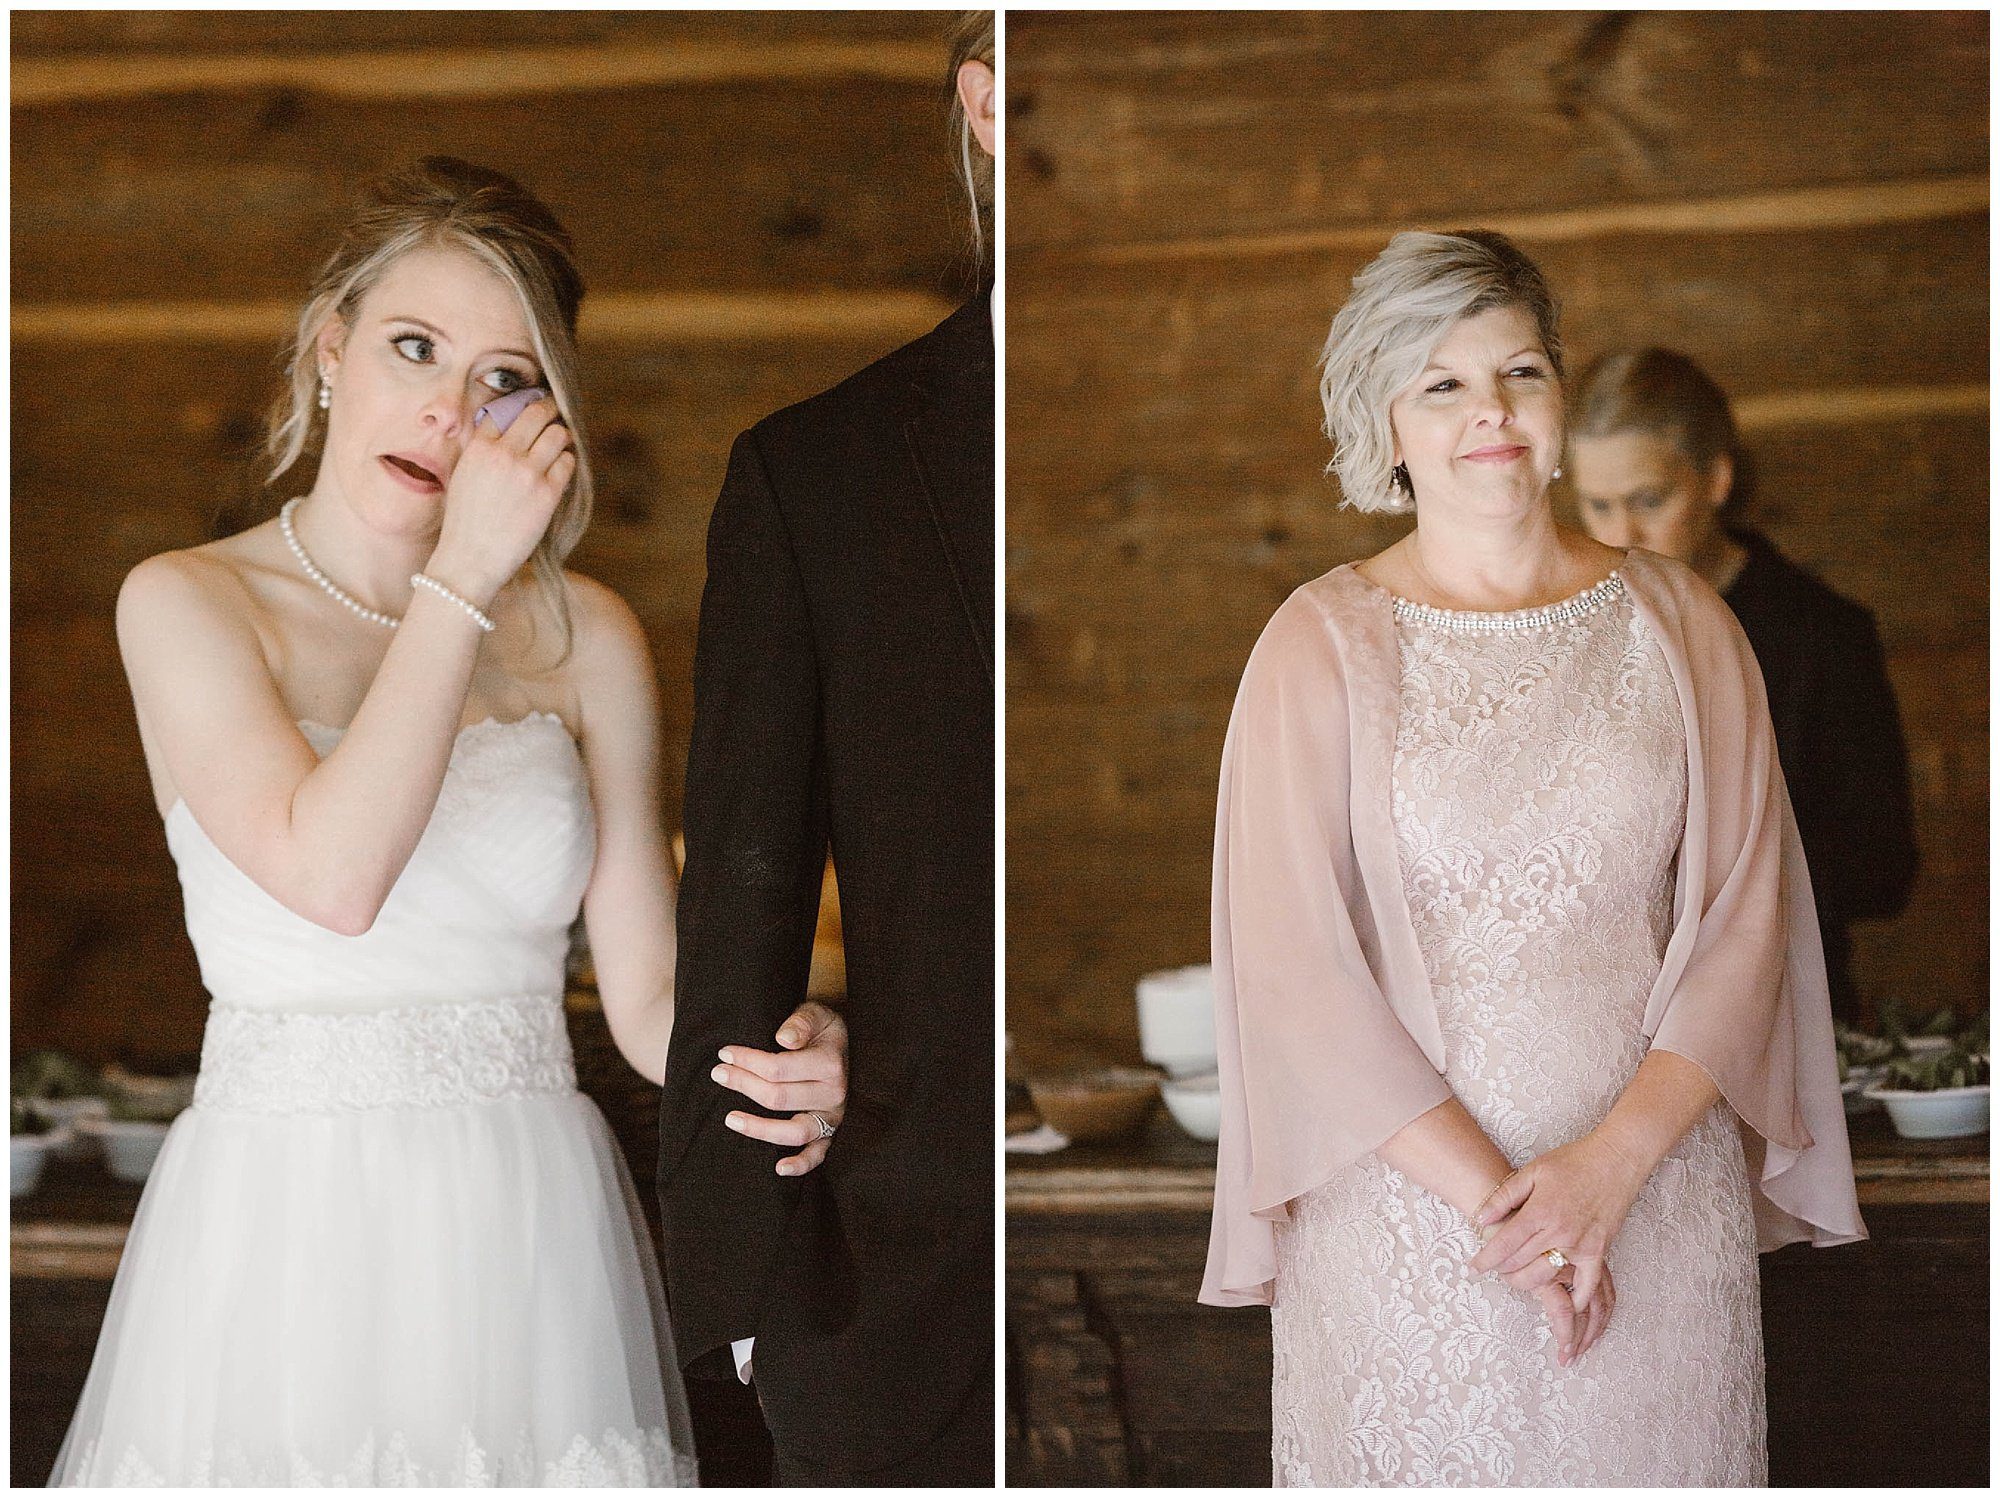 Bride crying at toasts on wedding day